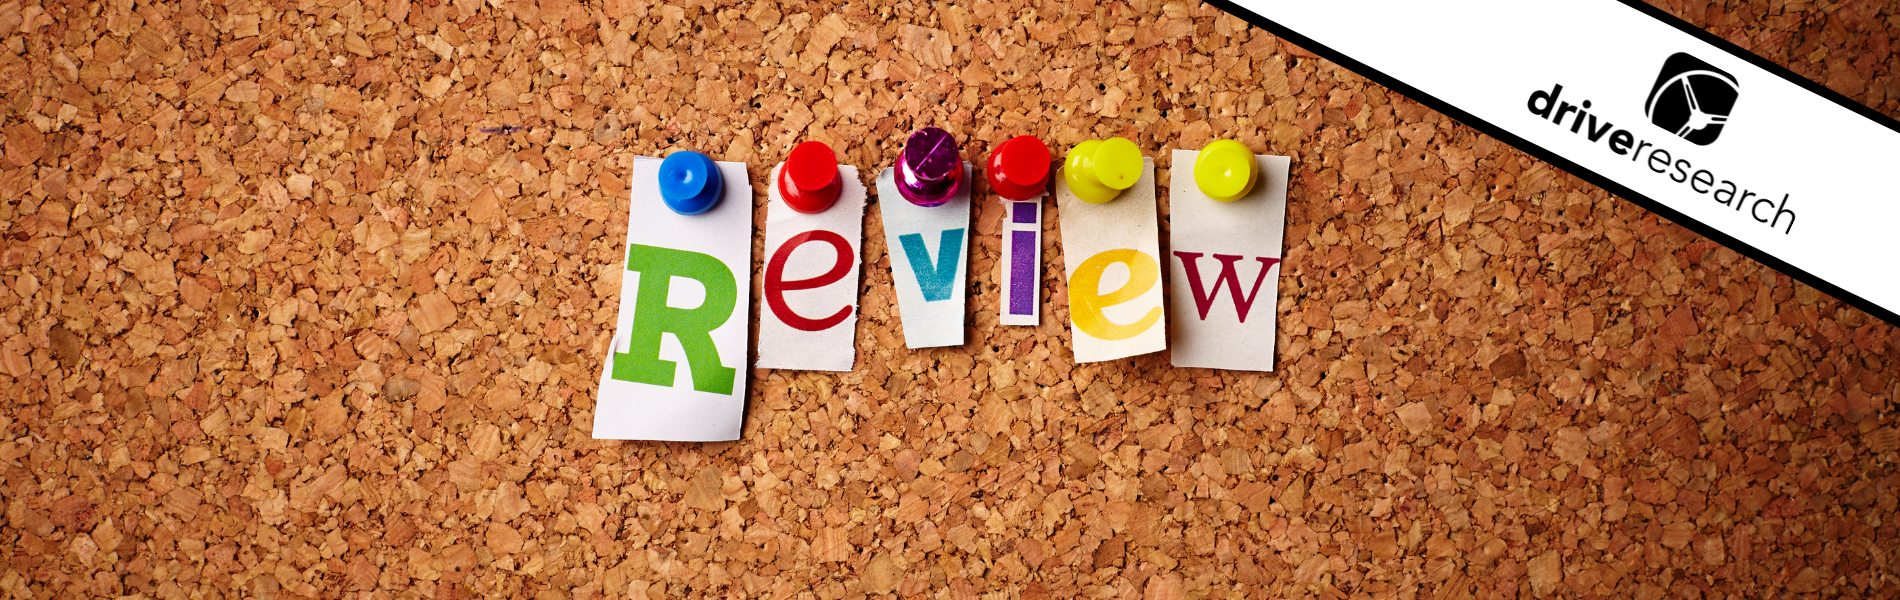 the word review thumb tacked to a cork board - drive research logo